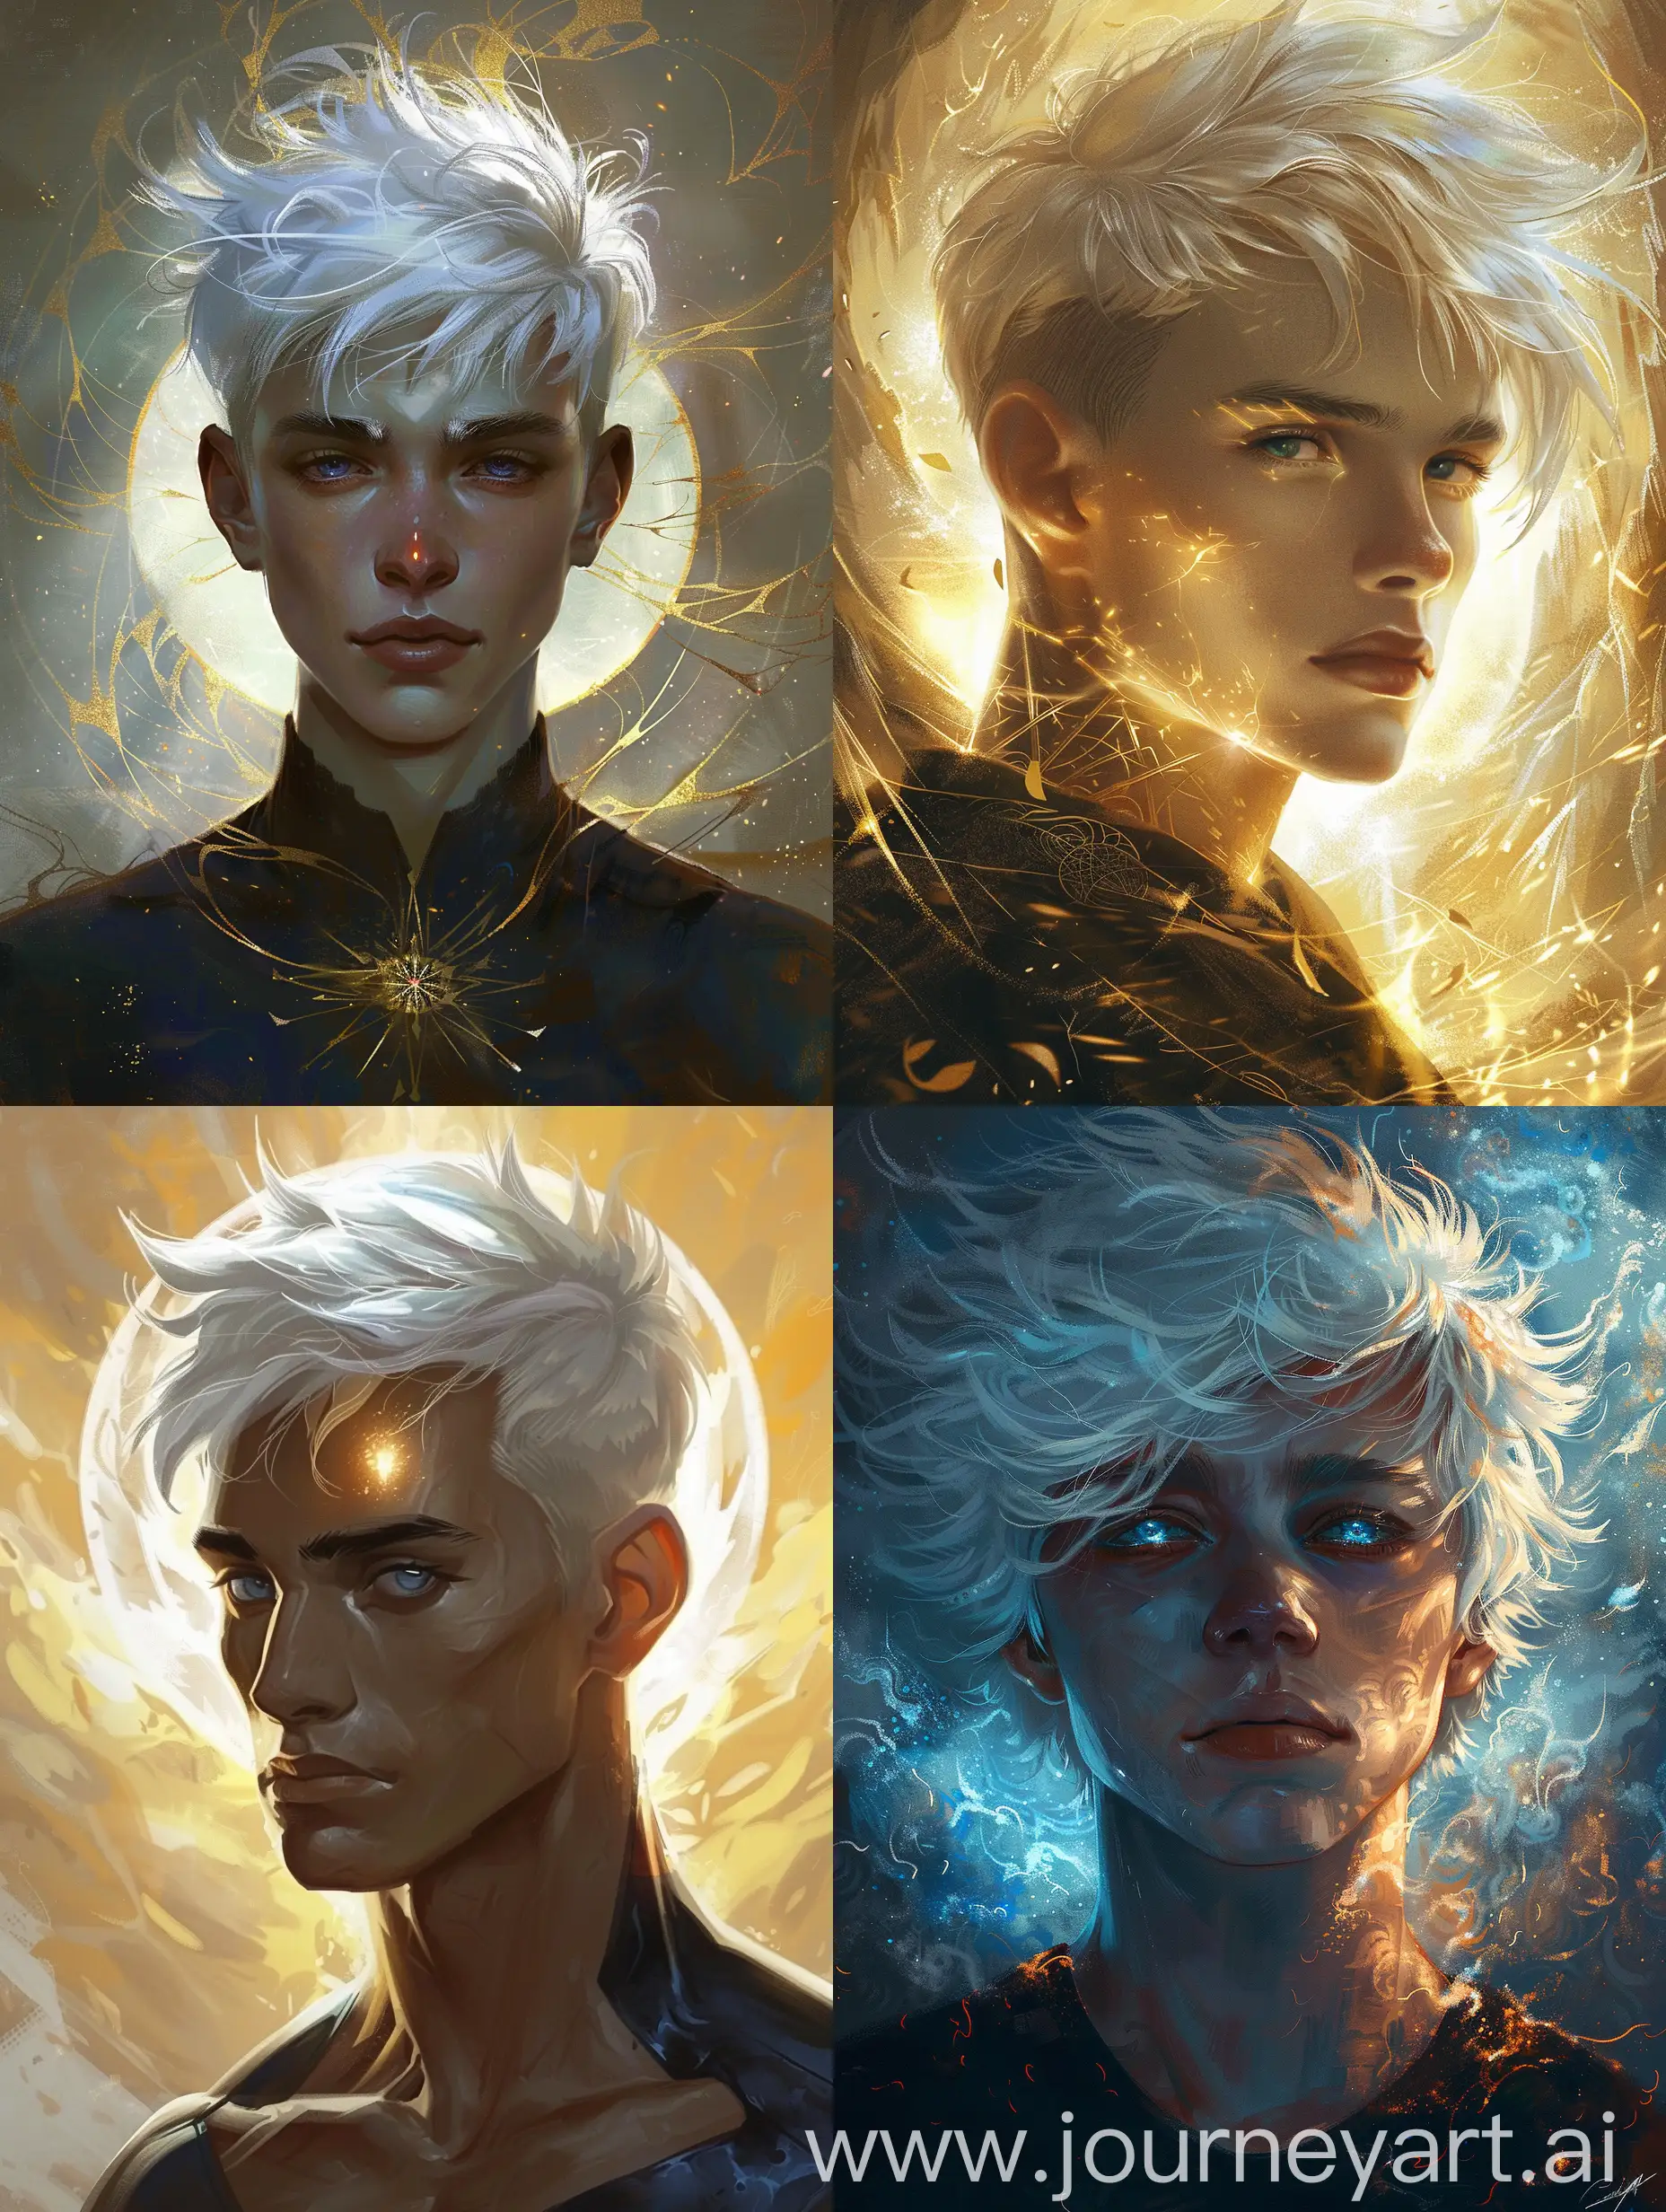 Subject: A primordial demigod son of the heavens. Tall, lean, imposing, uncontrollable aura of power, short white hair that falls over one eye, dark blue eyes, very chiseled and good looking masculine and feminine beauty.

Background: the heavens shine brightly for its young prince.

Style/detail/color: digital painting mimicking traditional oil painting, fantastical elements, warm color palette, ethereal imagery, monochrome.